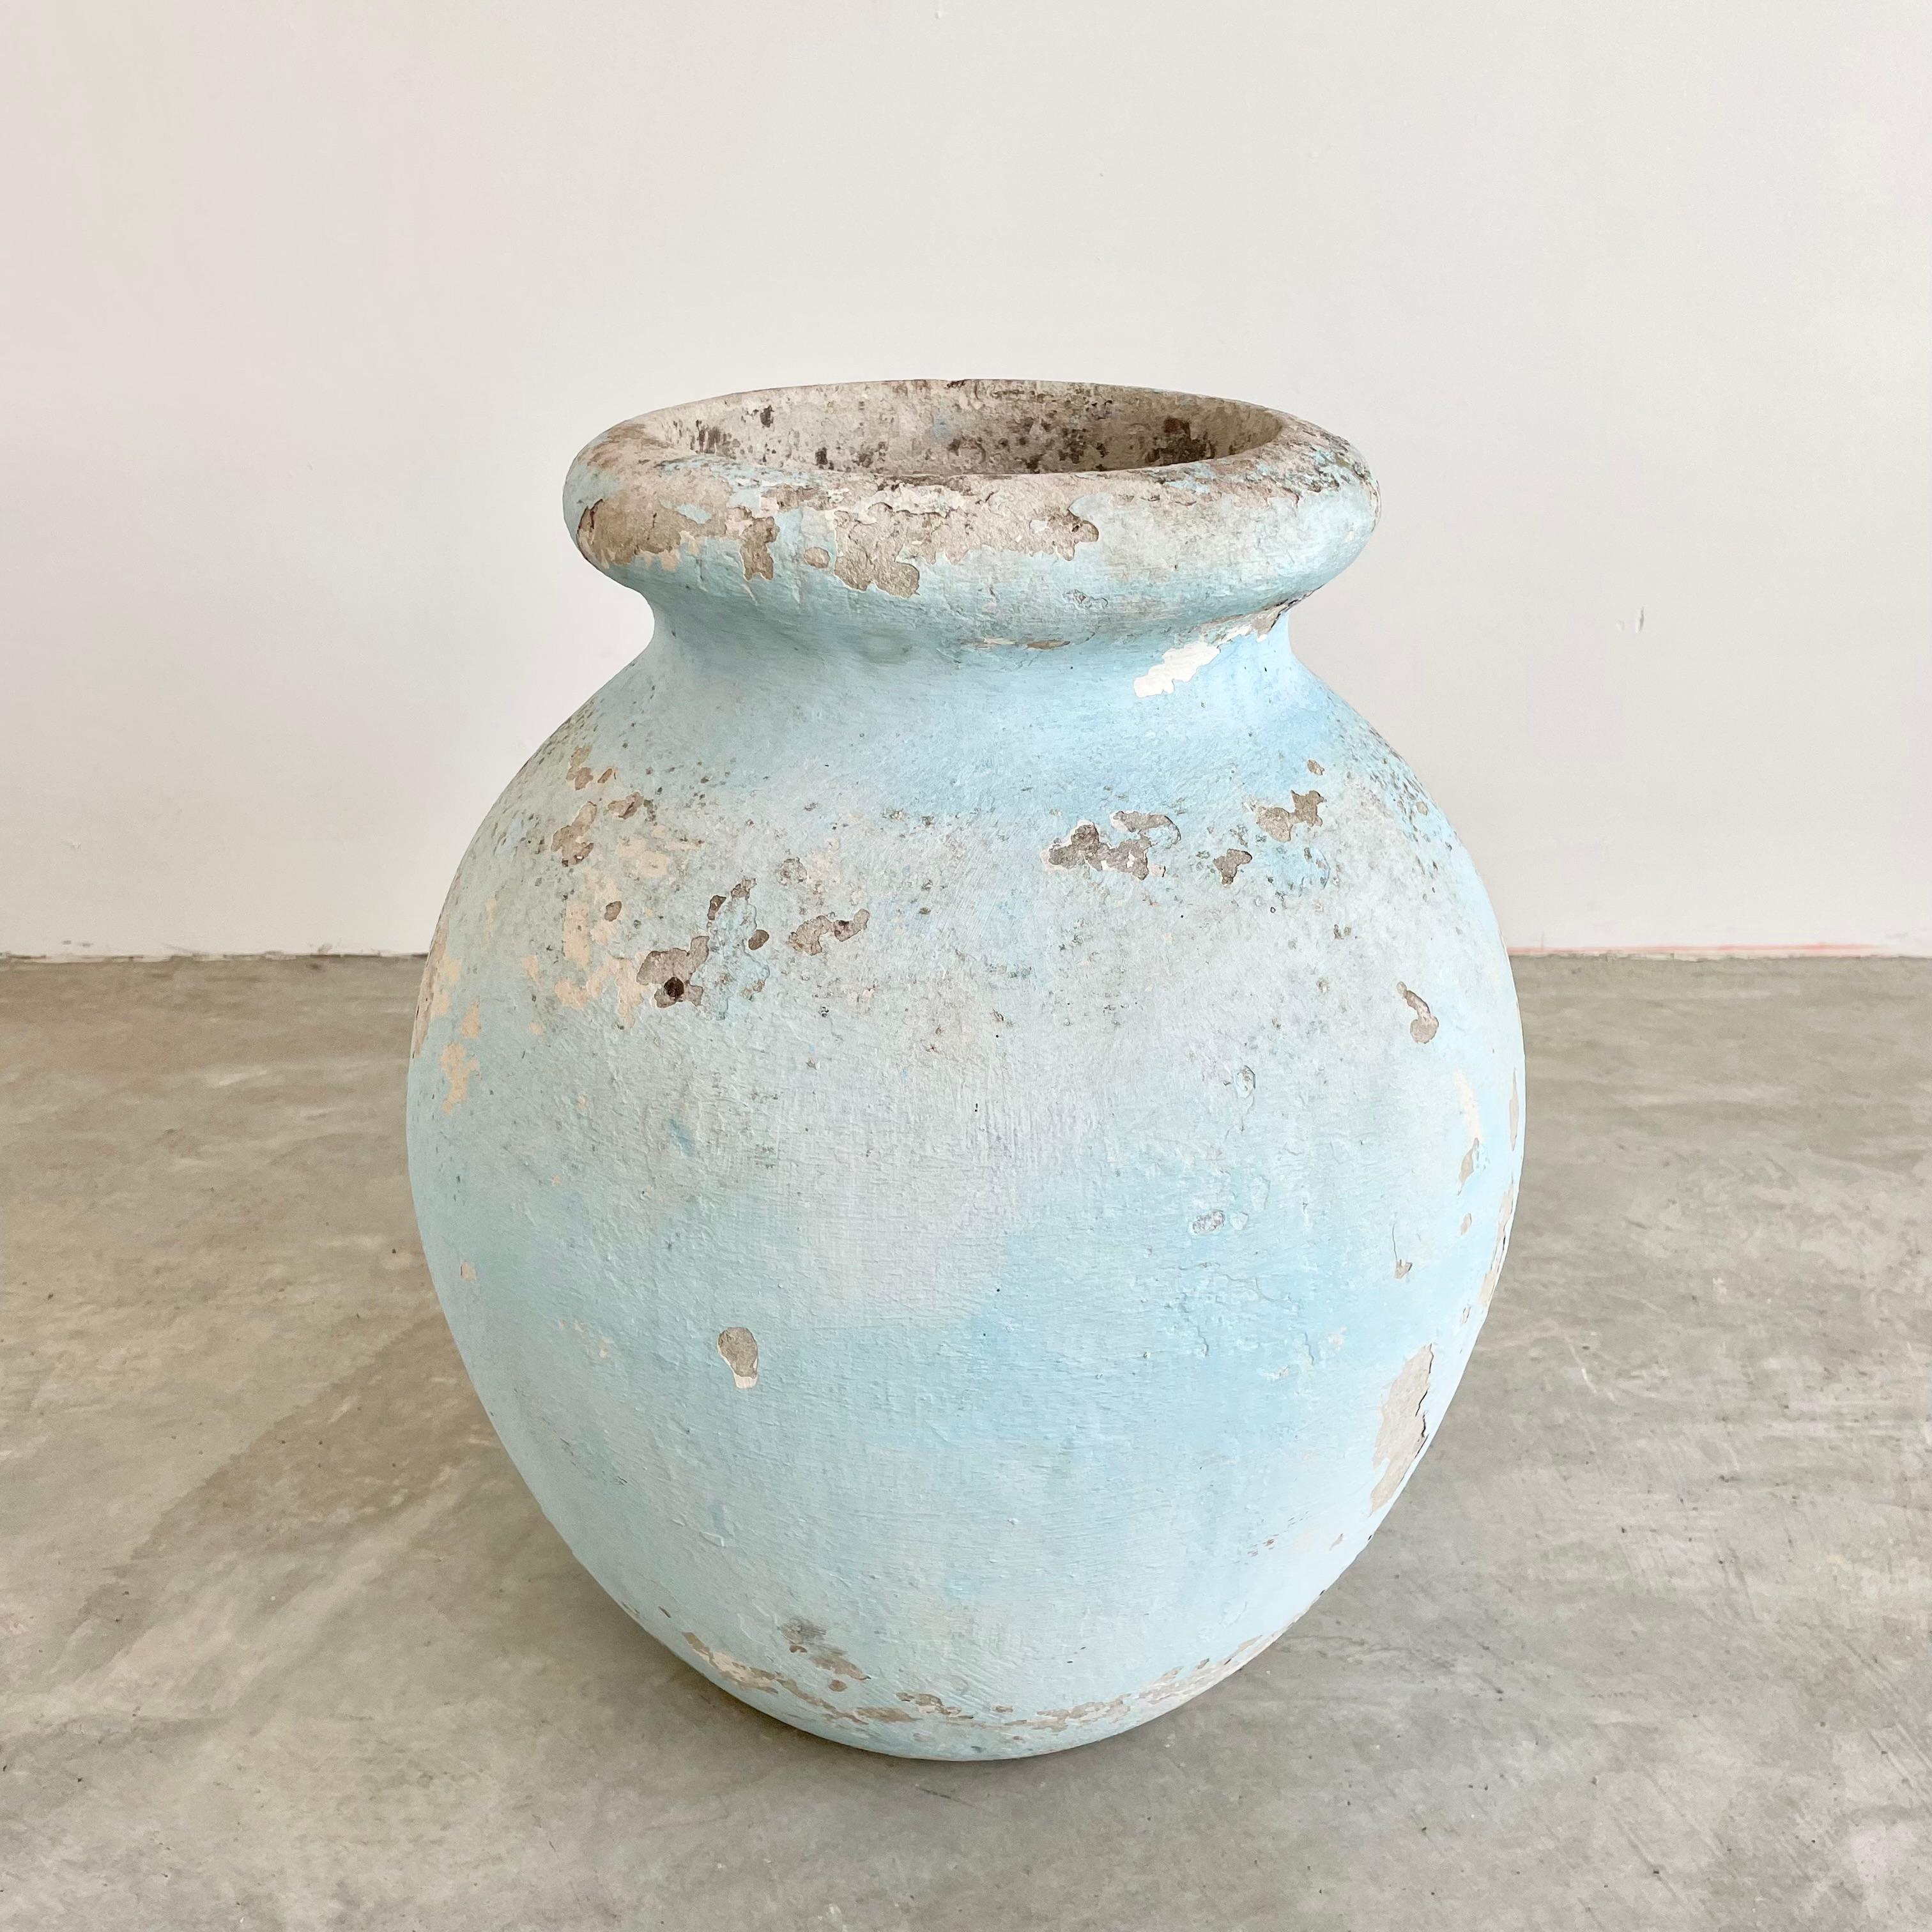 Concrete olive jar planter by Willy Guhl with great patina and prominent presence. Beautiful pastel blue patina. Simple and elegant design perfect for any garden or patio. Excellent vintage condition. One available in this coloring/patina. 

Mouth